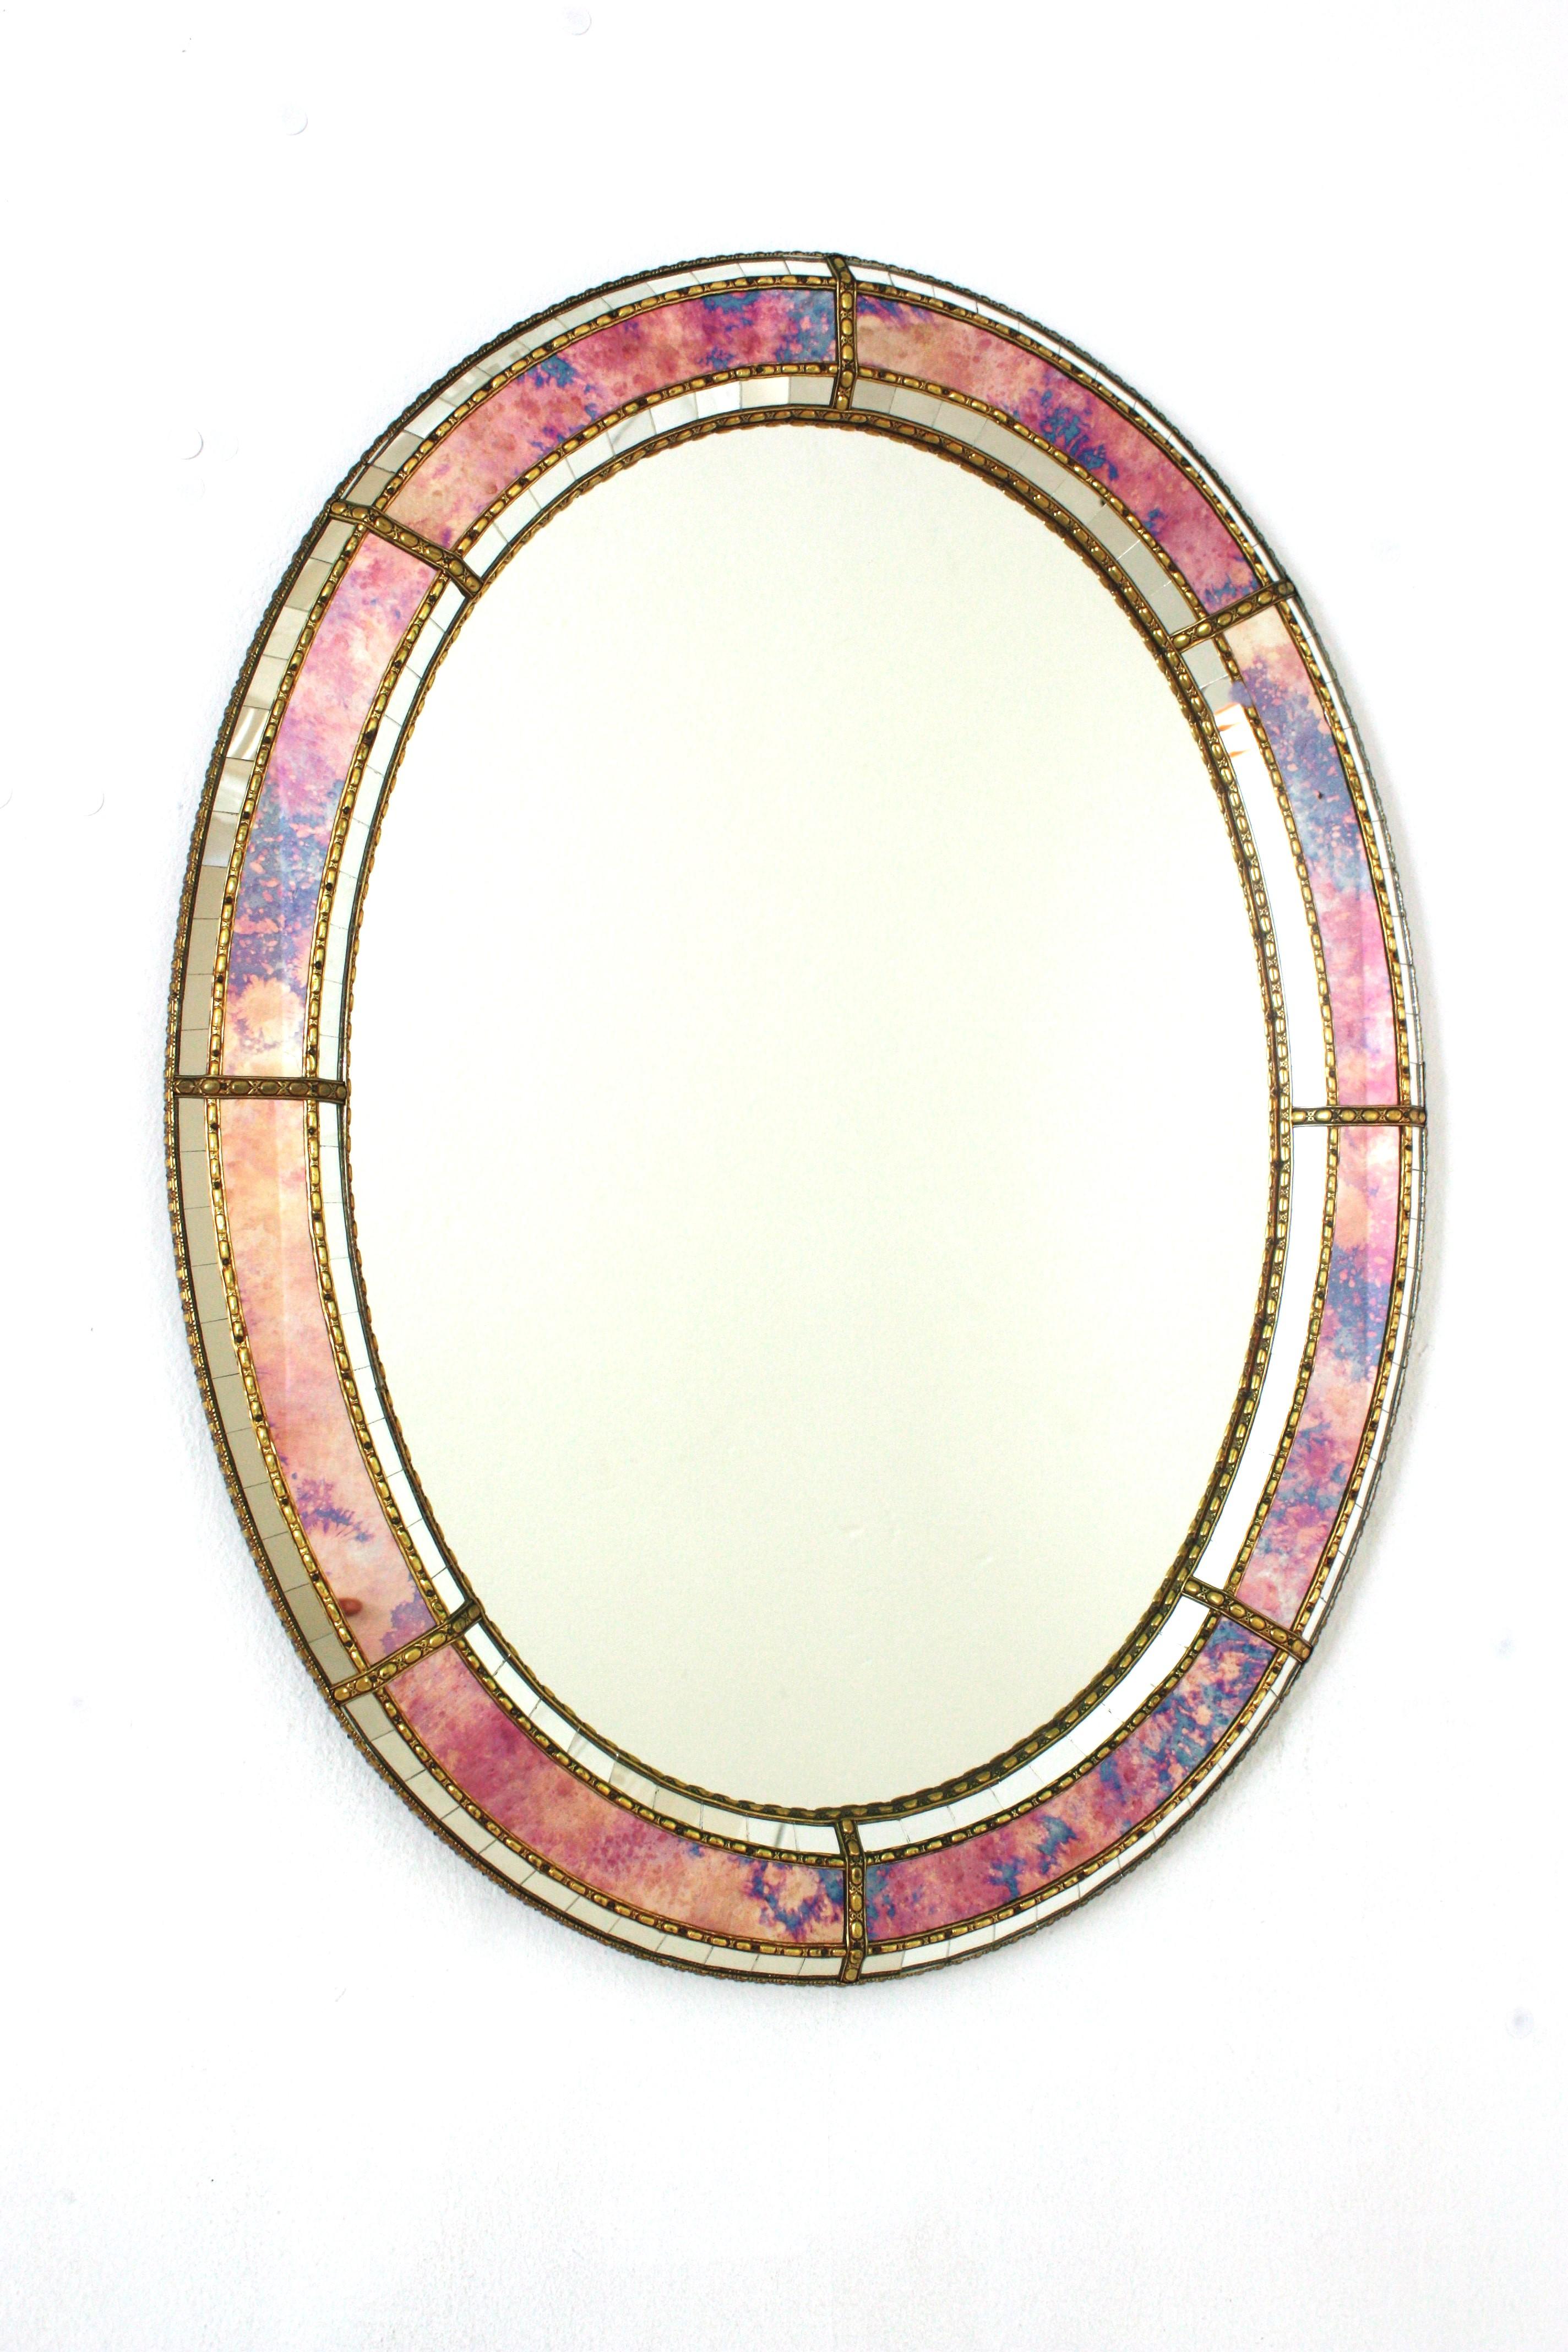 Elegant Venetian style Hollywood Regency oval mirror with iridiscent and mirror glass panels. Spain, 1960s
This glamorous mirror featuring a double layered mirror frame made of brass. Oval form with a frame that has two layers of decorative paneled